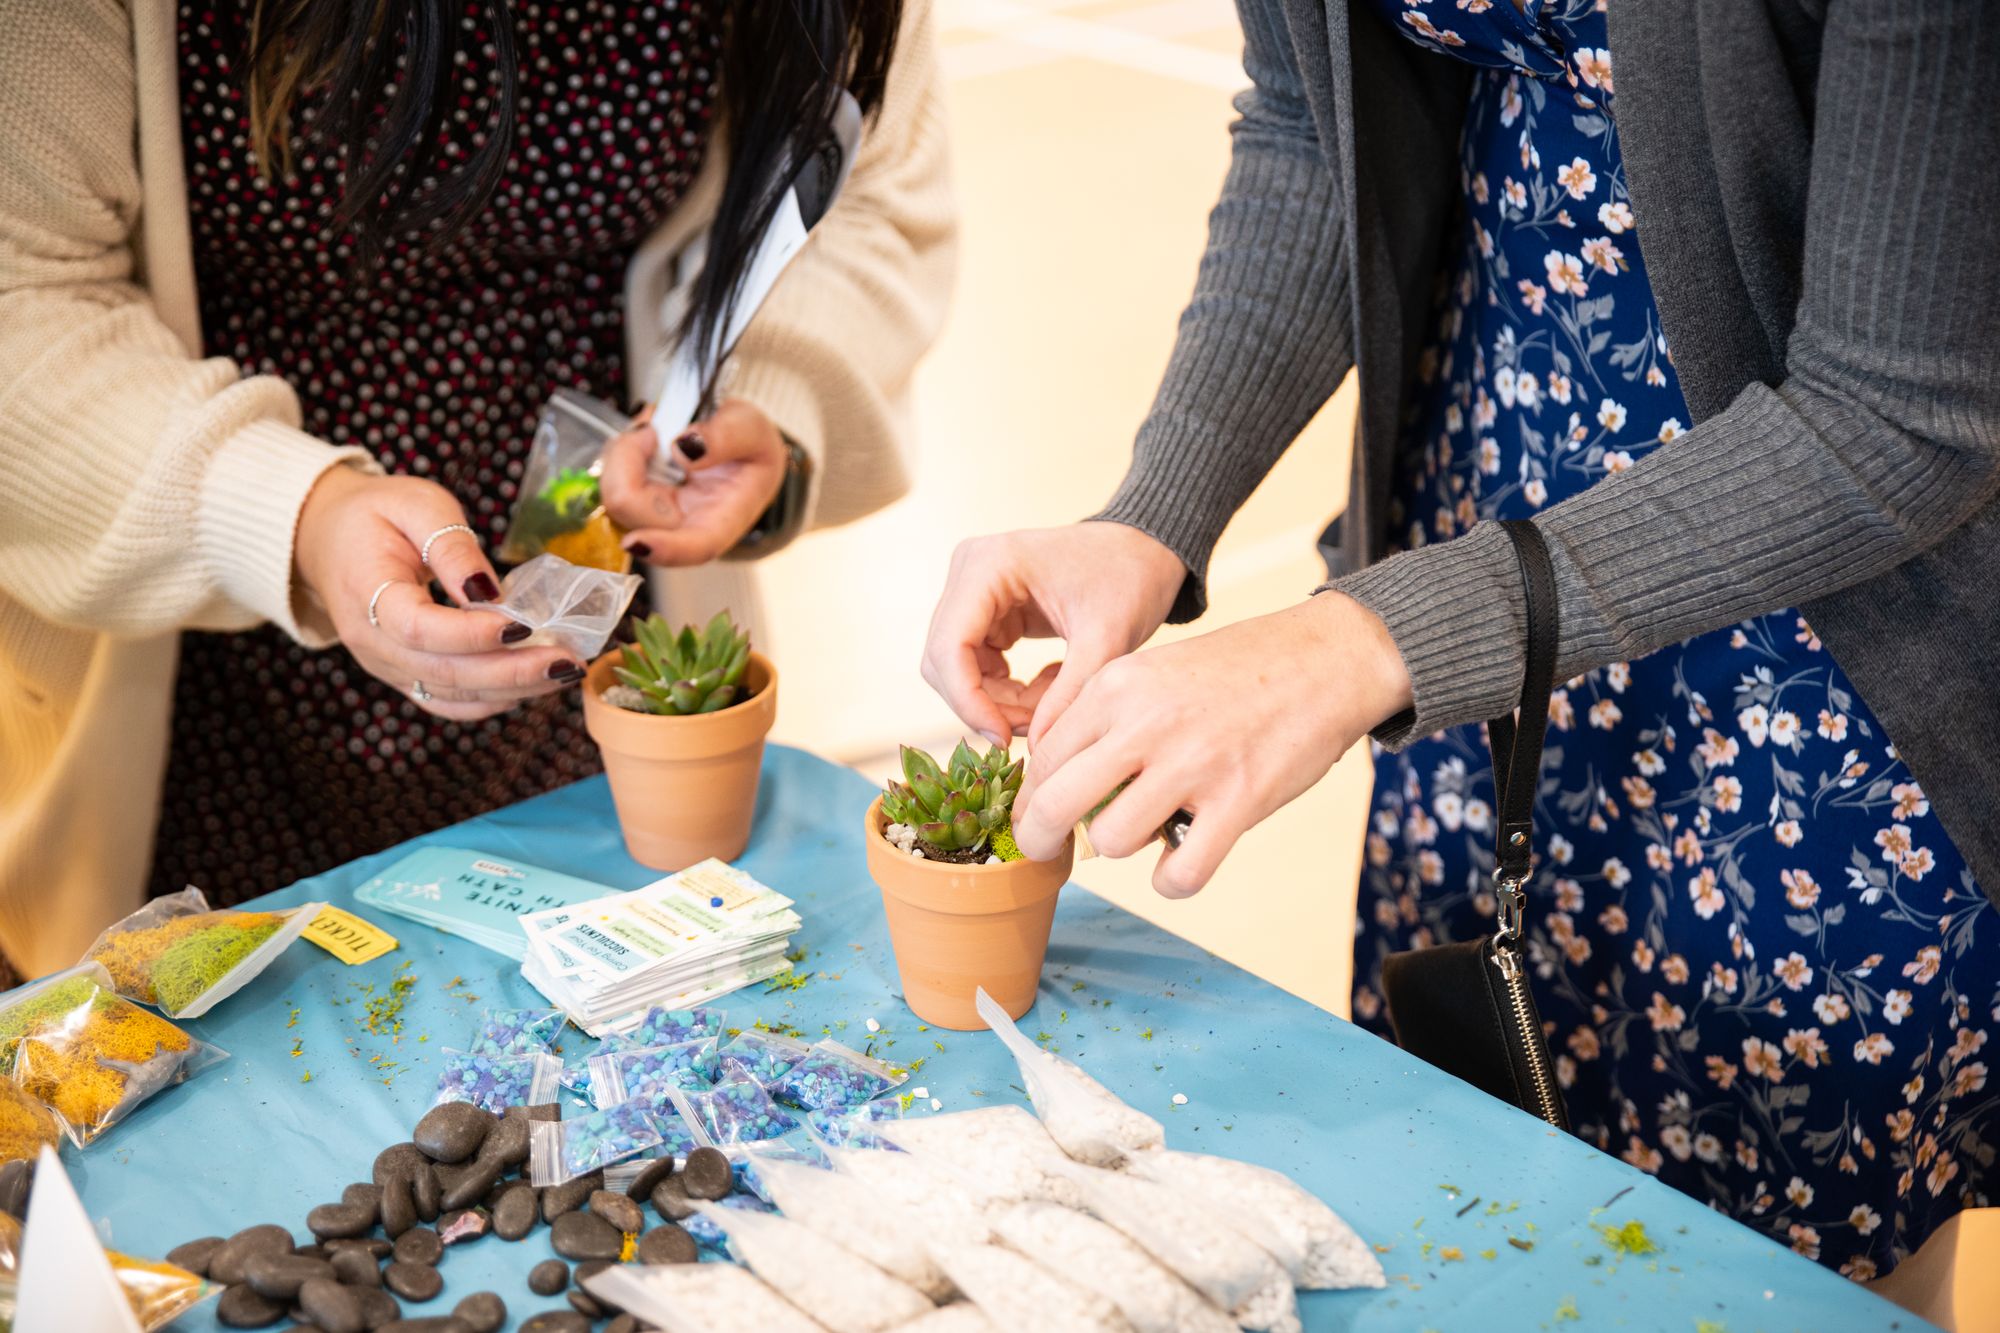 Women decorating planters at a Yaymaker private party